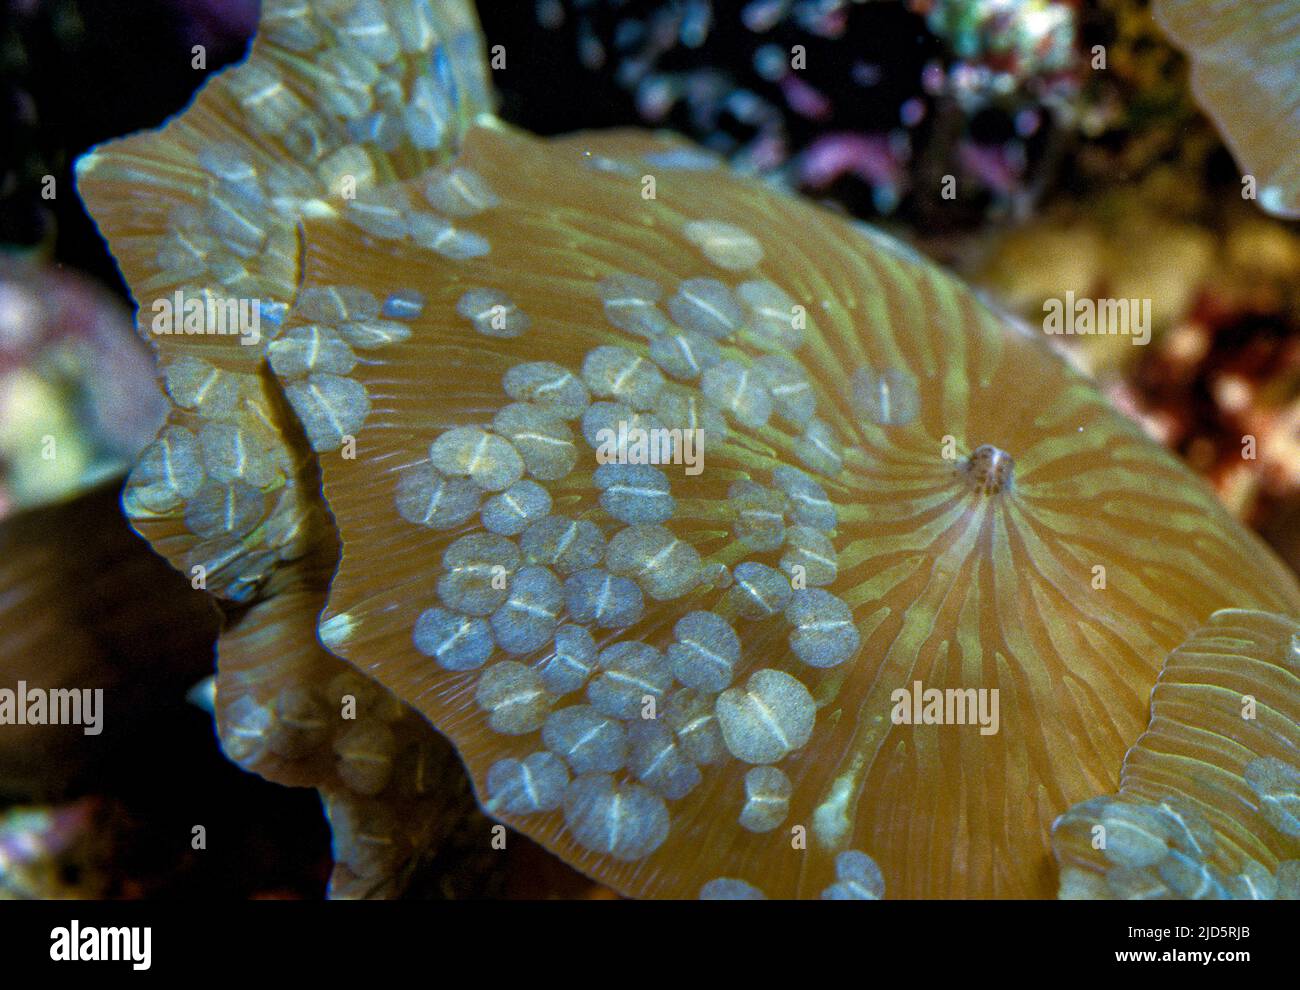 Acoel, commensal flatworms of the genus Waminoa living on a disc anemone (Discosoma sp.). Stock Photo